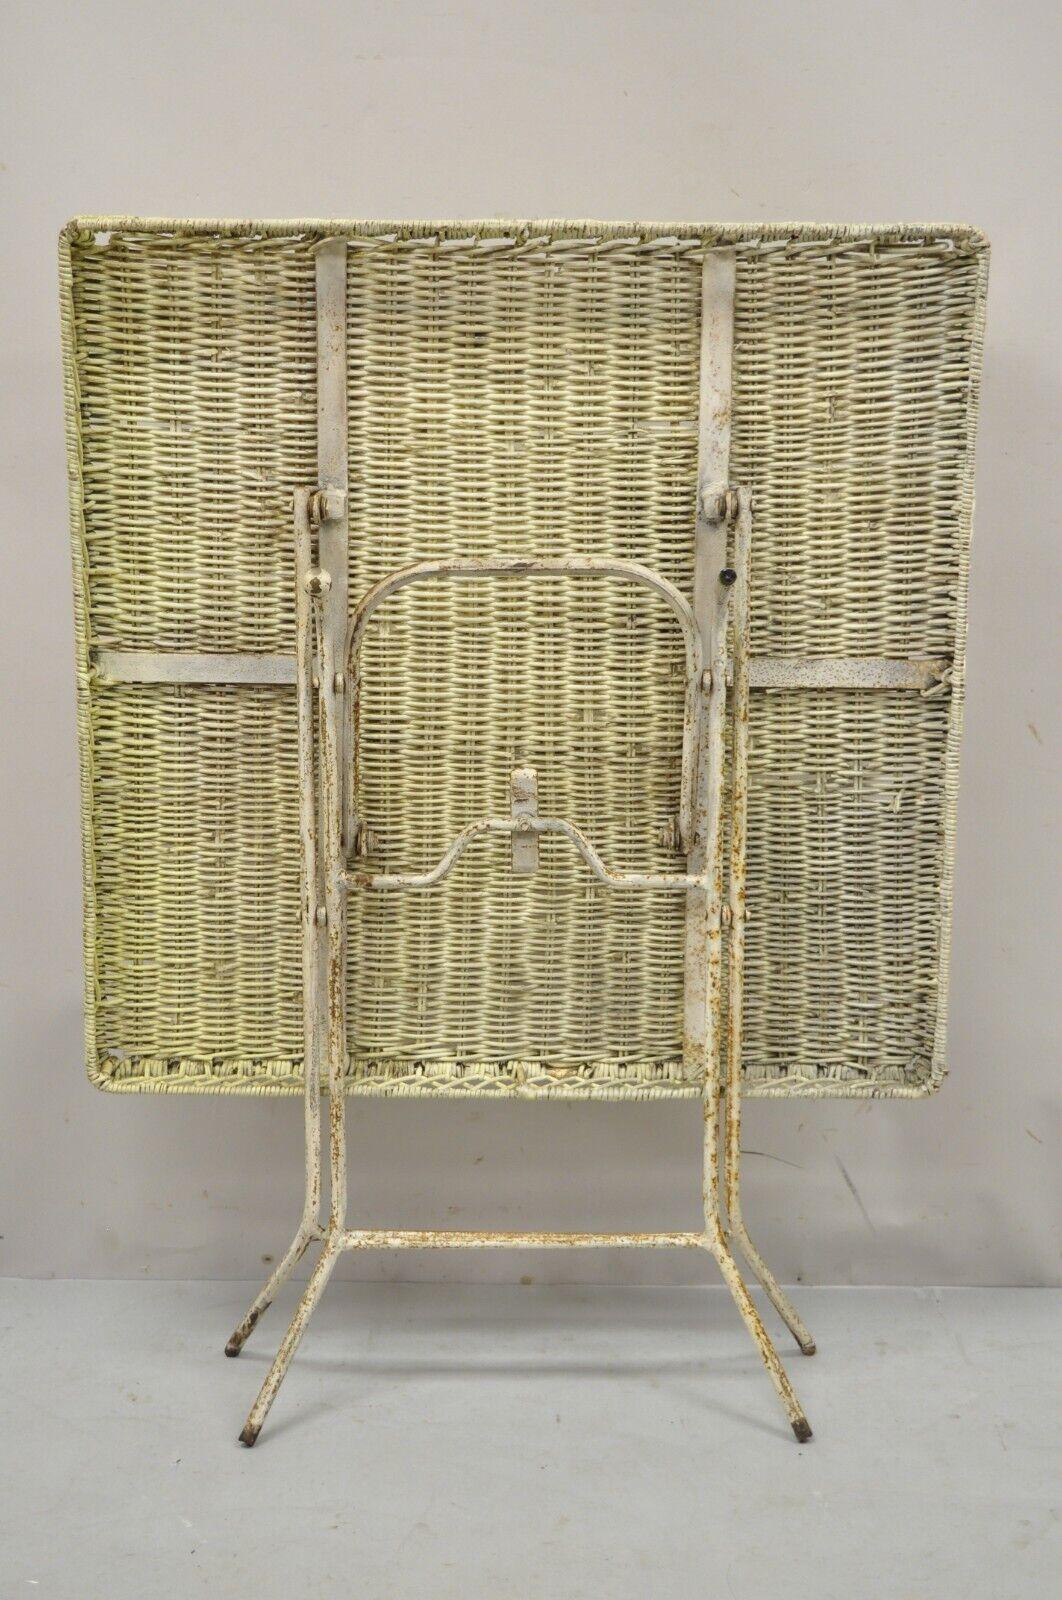 Antique Victorian Style Wrought Iron Folding Card Game Table Wicker Rattan Top In Good Condition For Sale In Philadelphia, PA